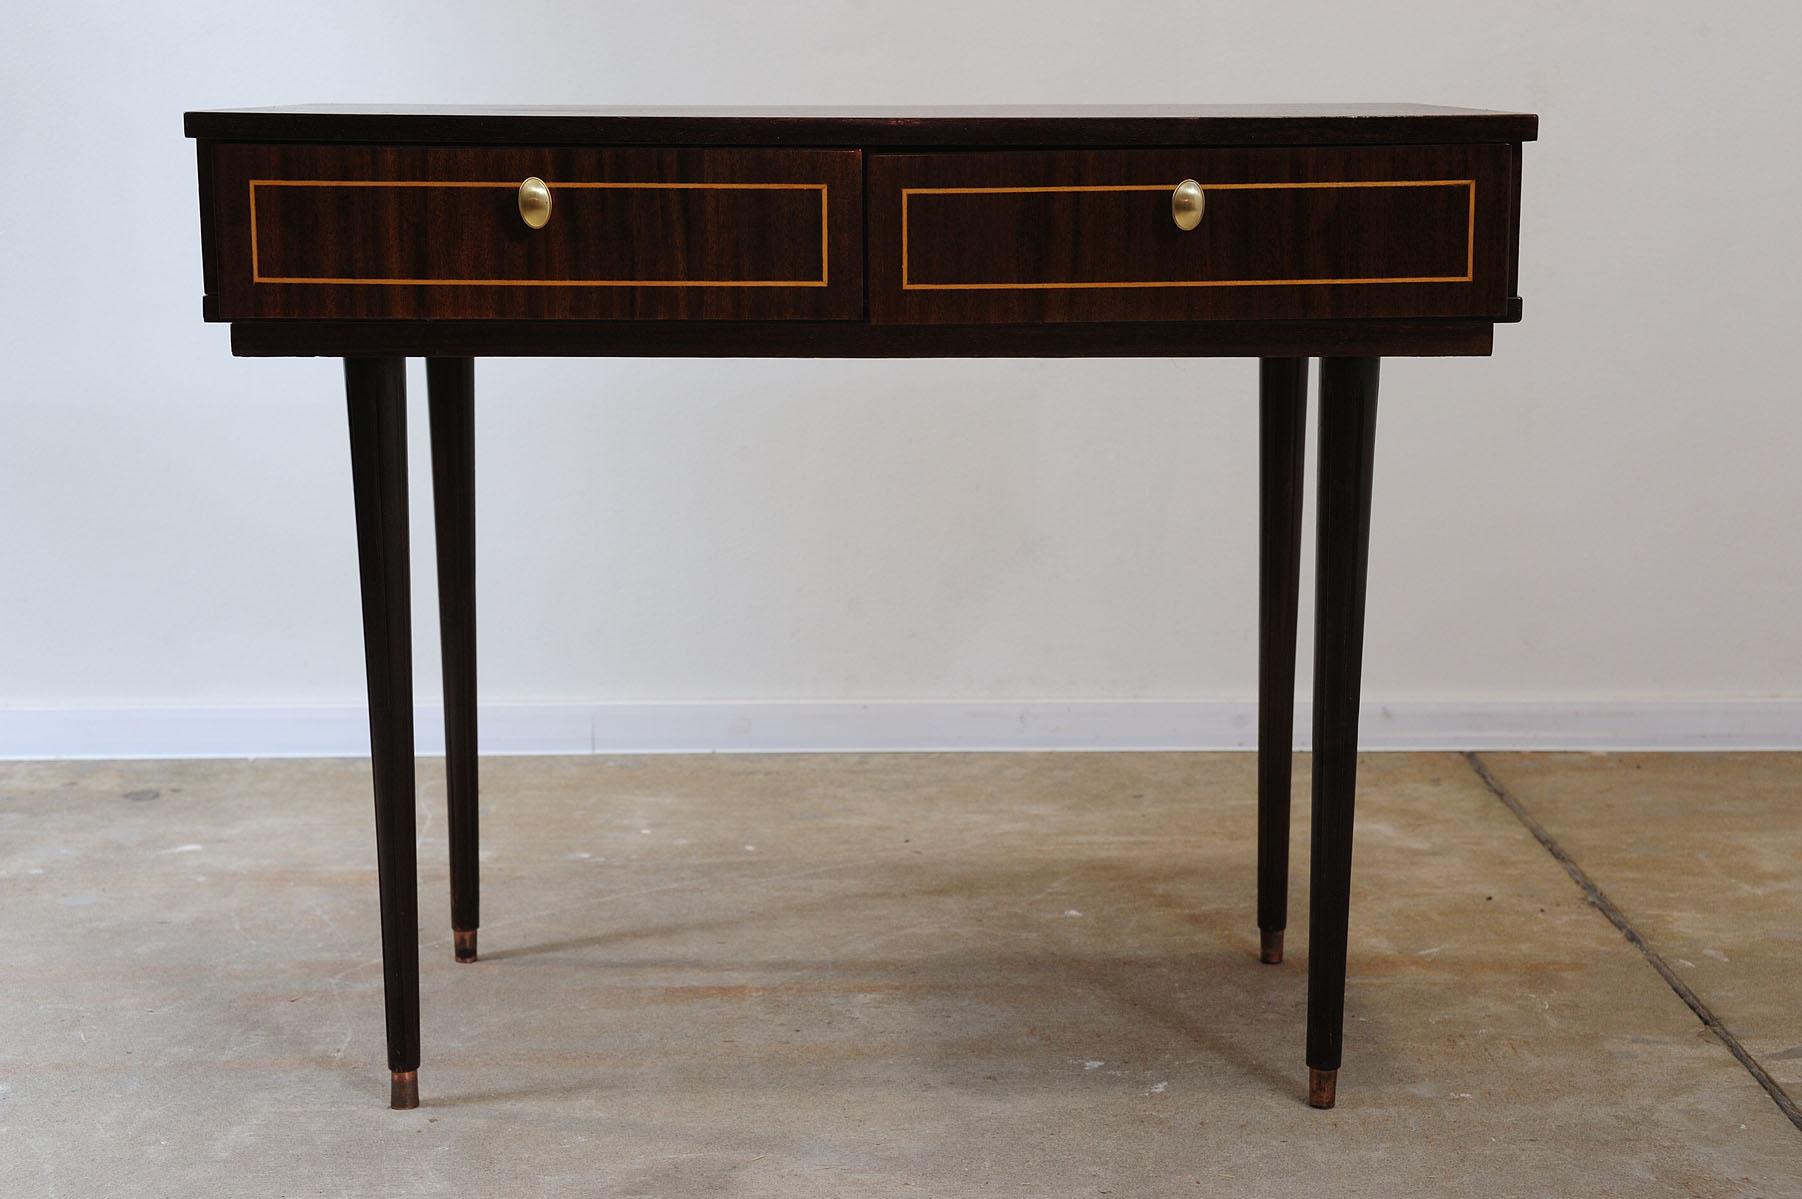 This mid century table was made in the former Soviet Union in the 1970´s as a part of a mahagony mid century modern living room.
Its design is elegant and modern. It can also be used as a dressing table.

It has interestingly shaped legs with arched